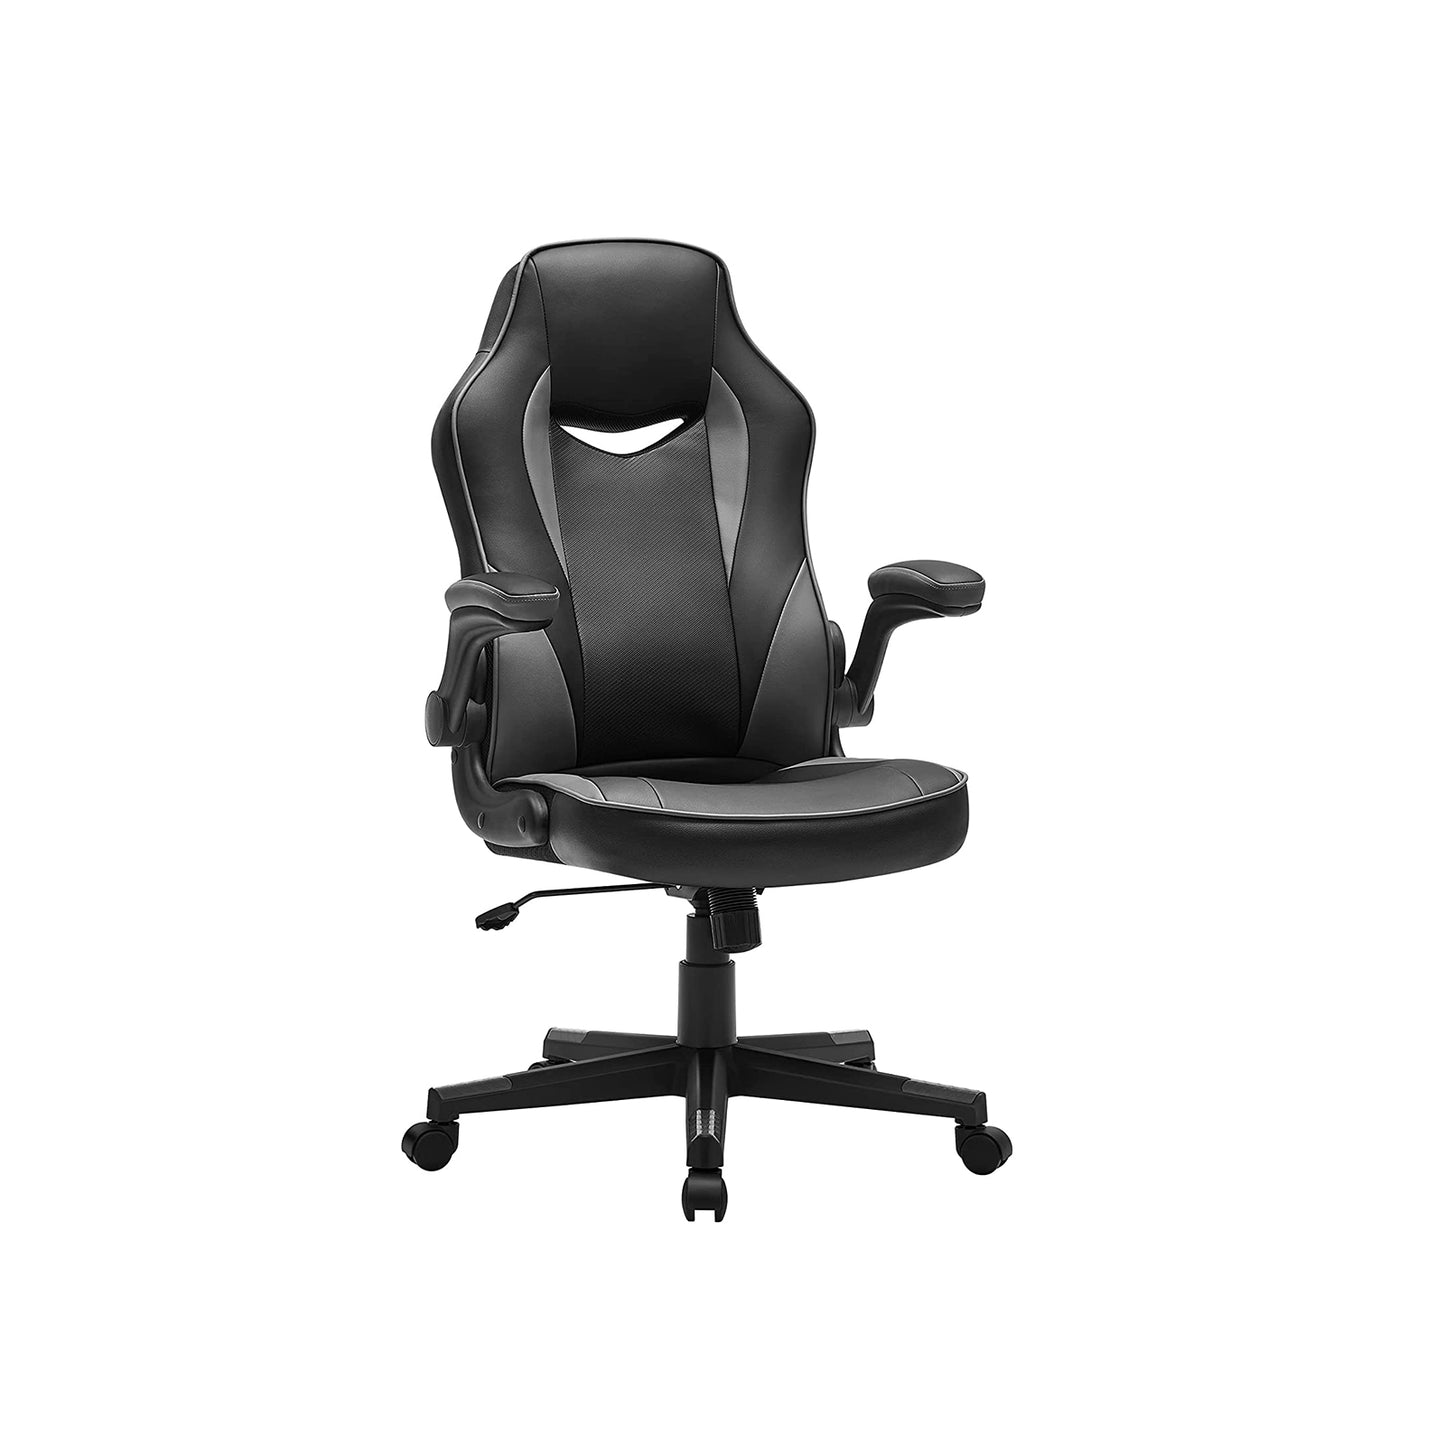 Height adjustable gaming chair